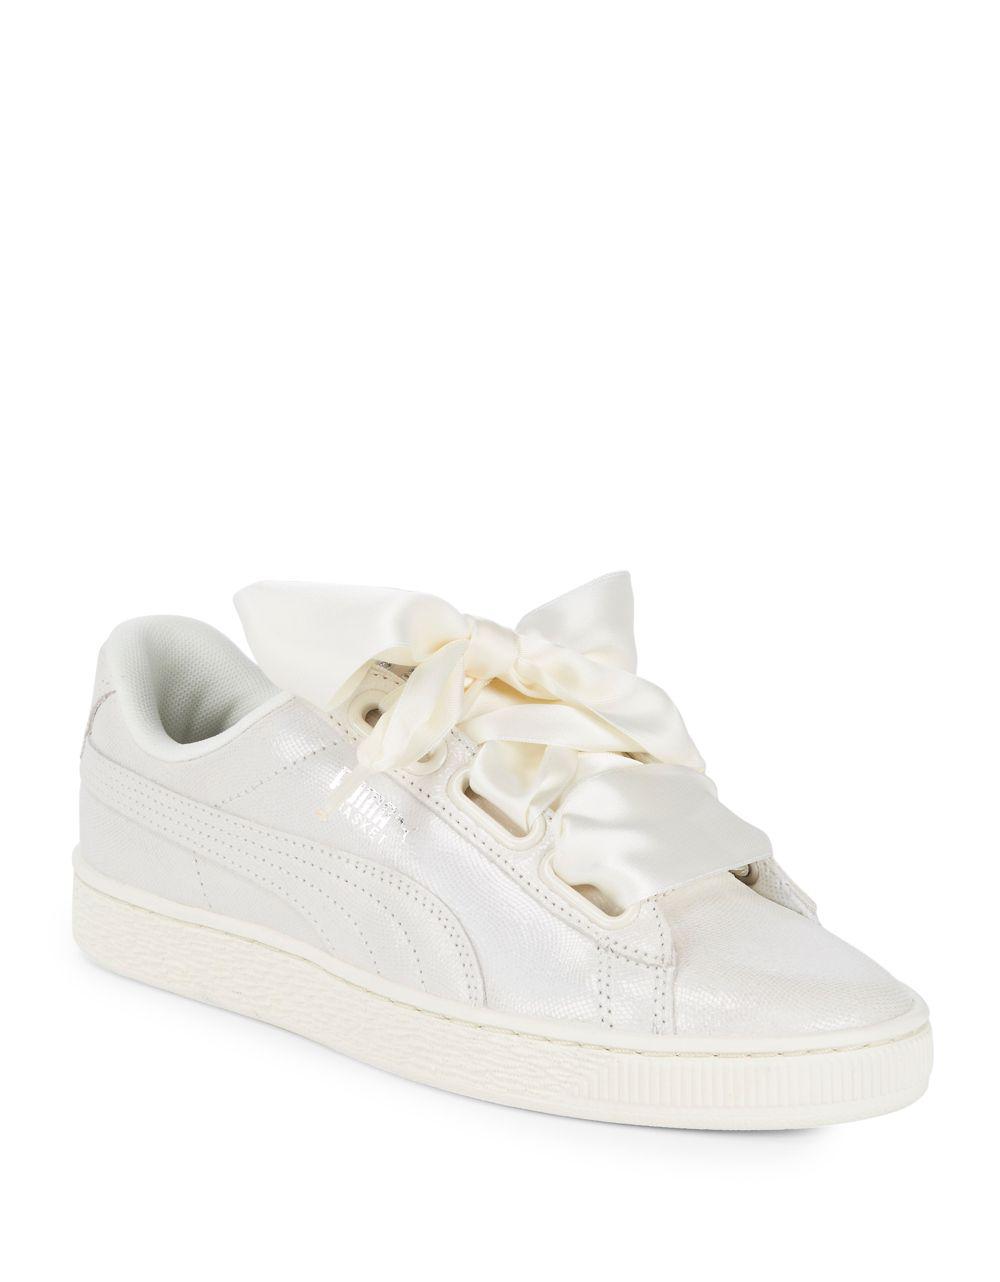 puma sneakers with ribbon laces